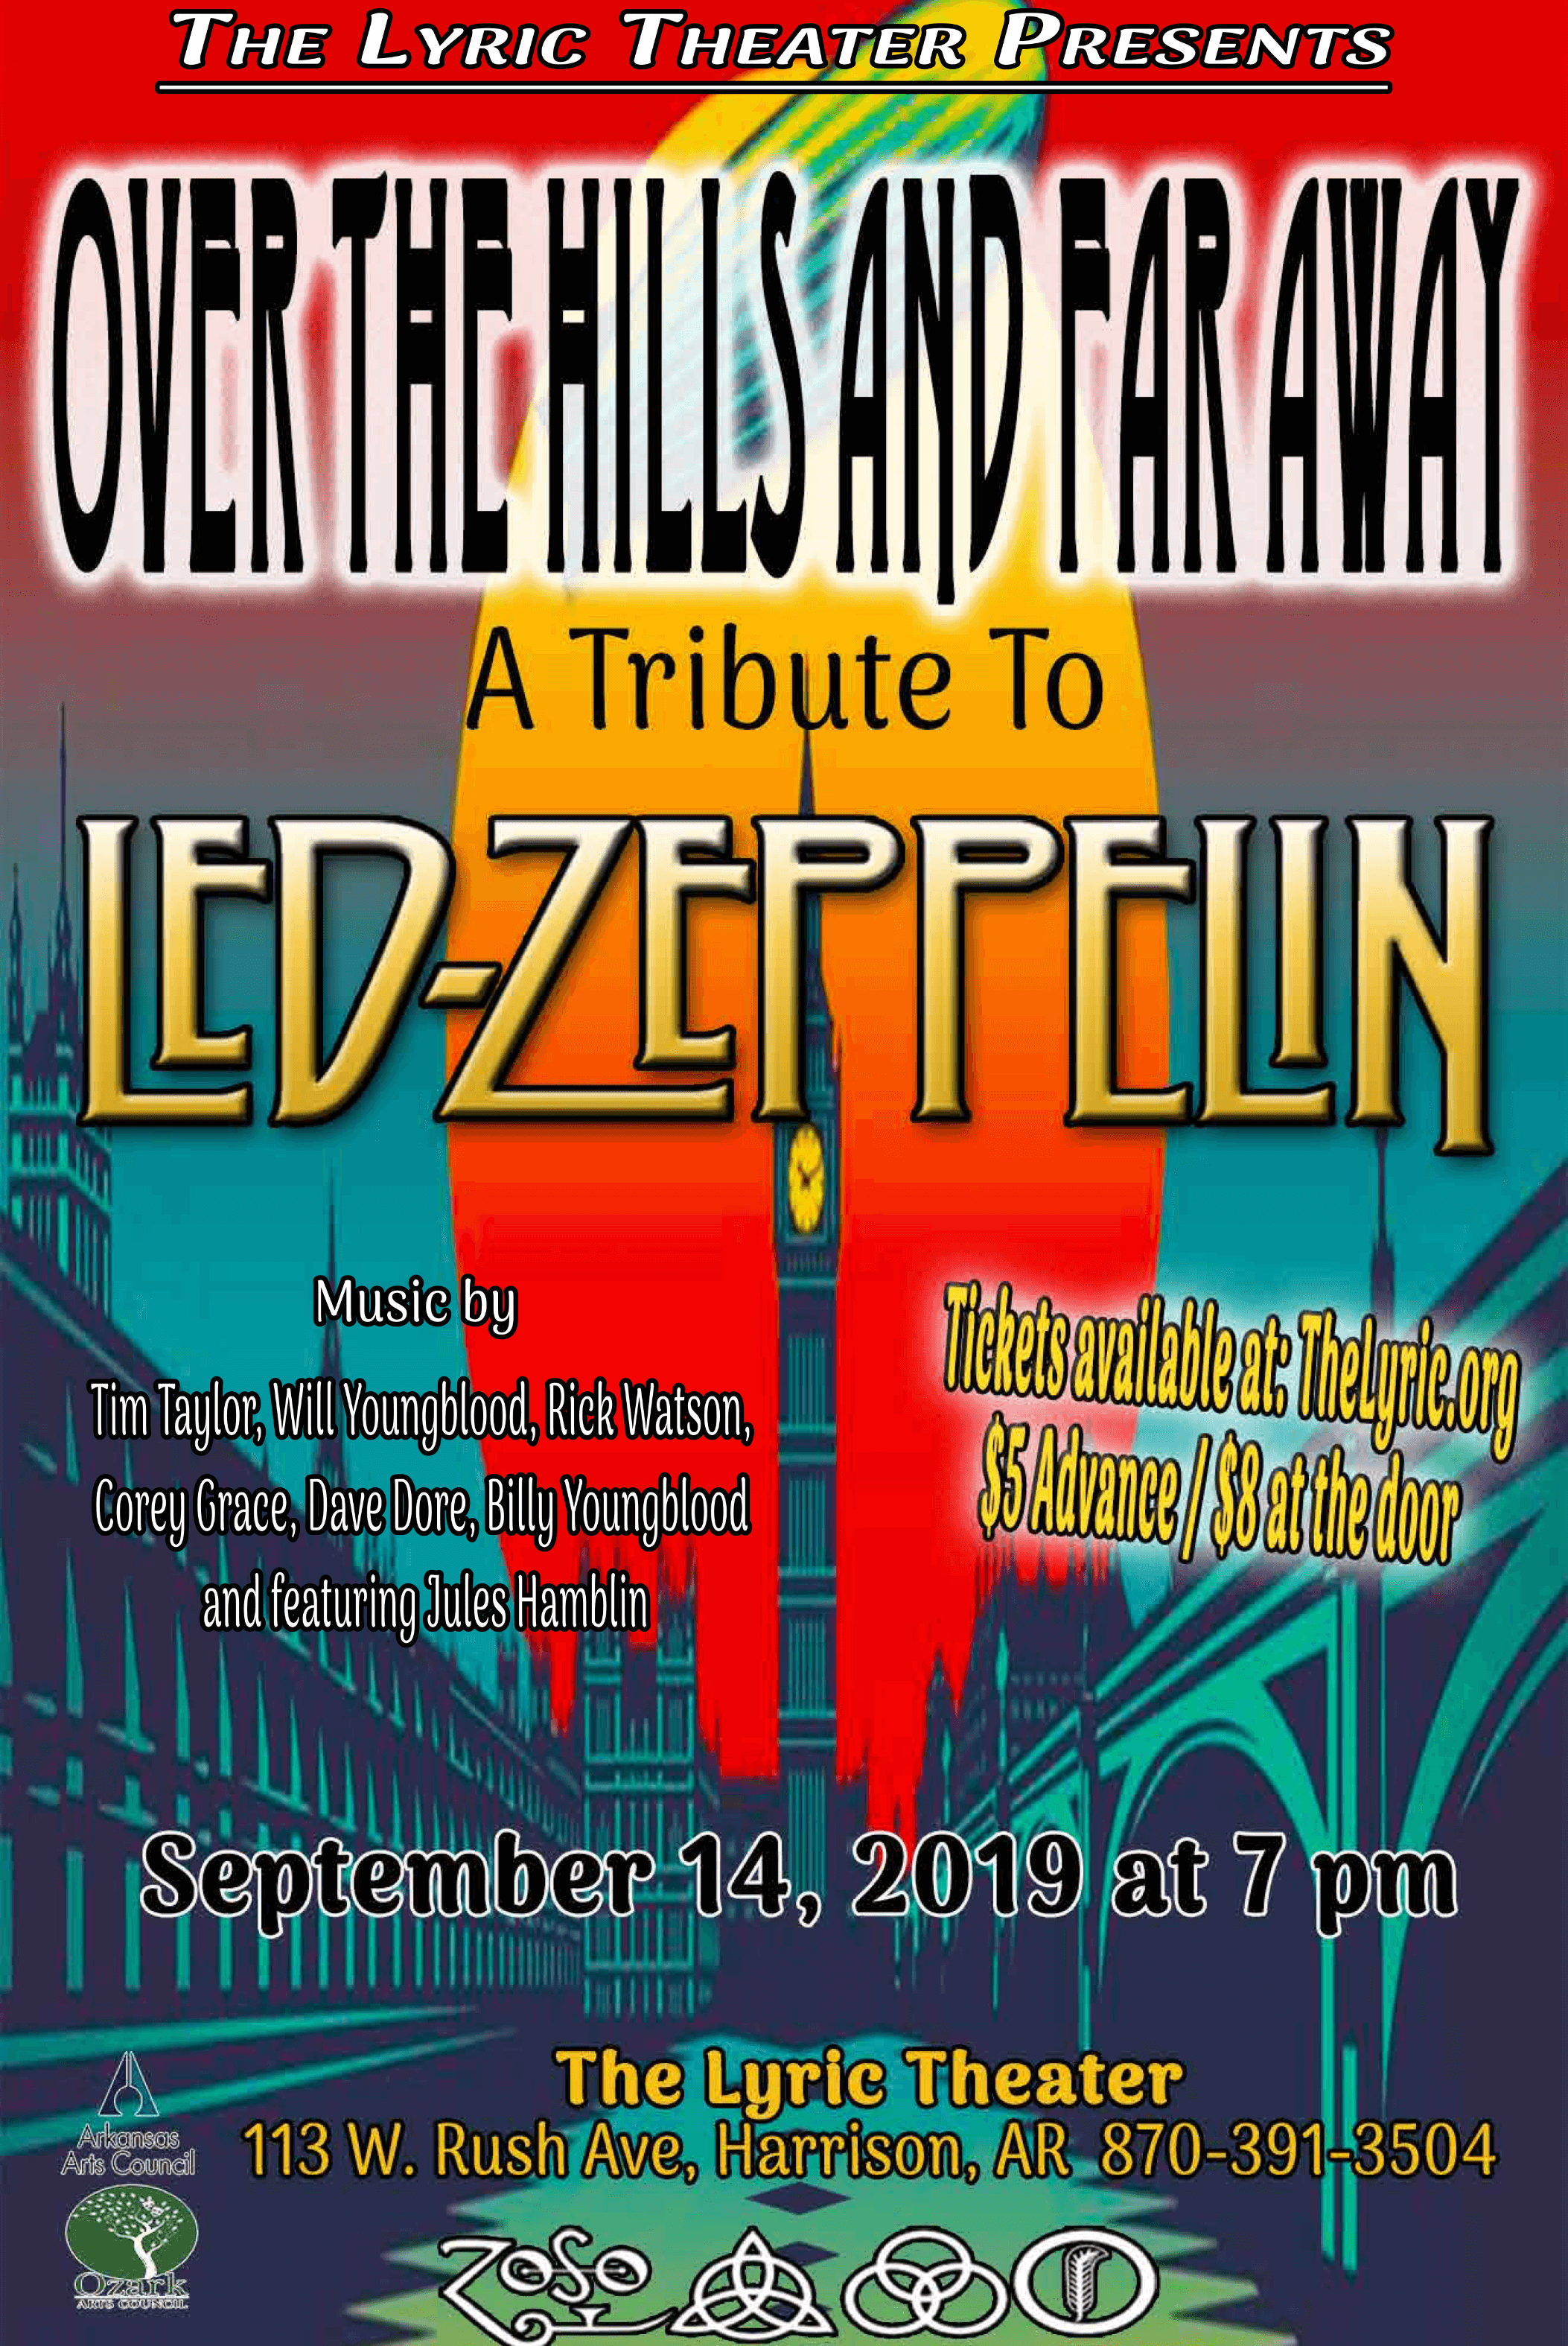 Over the Hills and Far Away: A Tribute to Led Zeppelin — Saturday, September 14, 2019 at 7:00 — #LiveAtTheLyric!